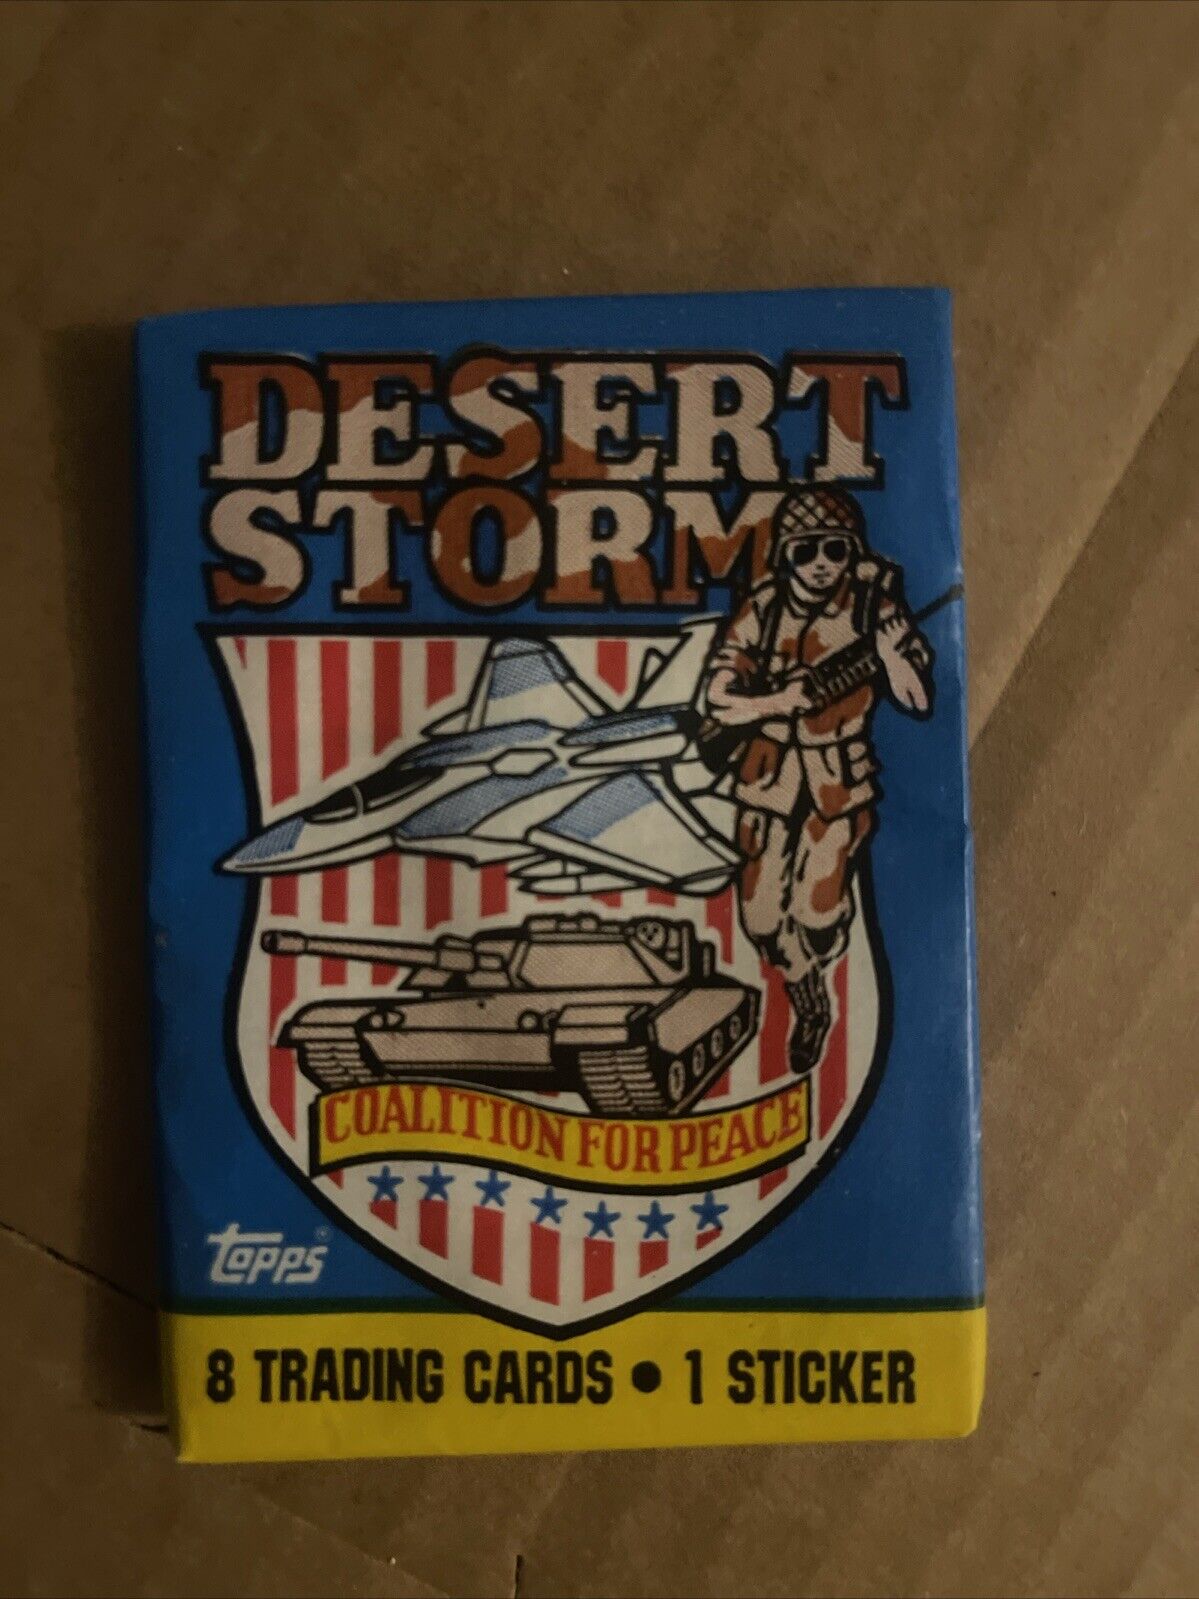 1991 Topps Desert Storm Coalition for Peace Trading Cards Sealed Wax Pack